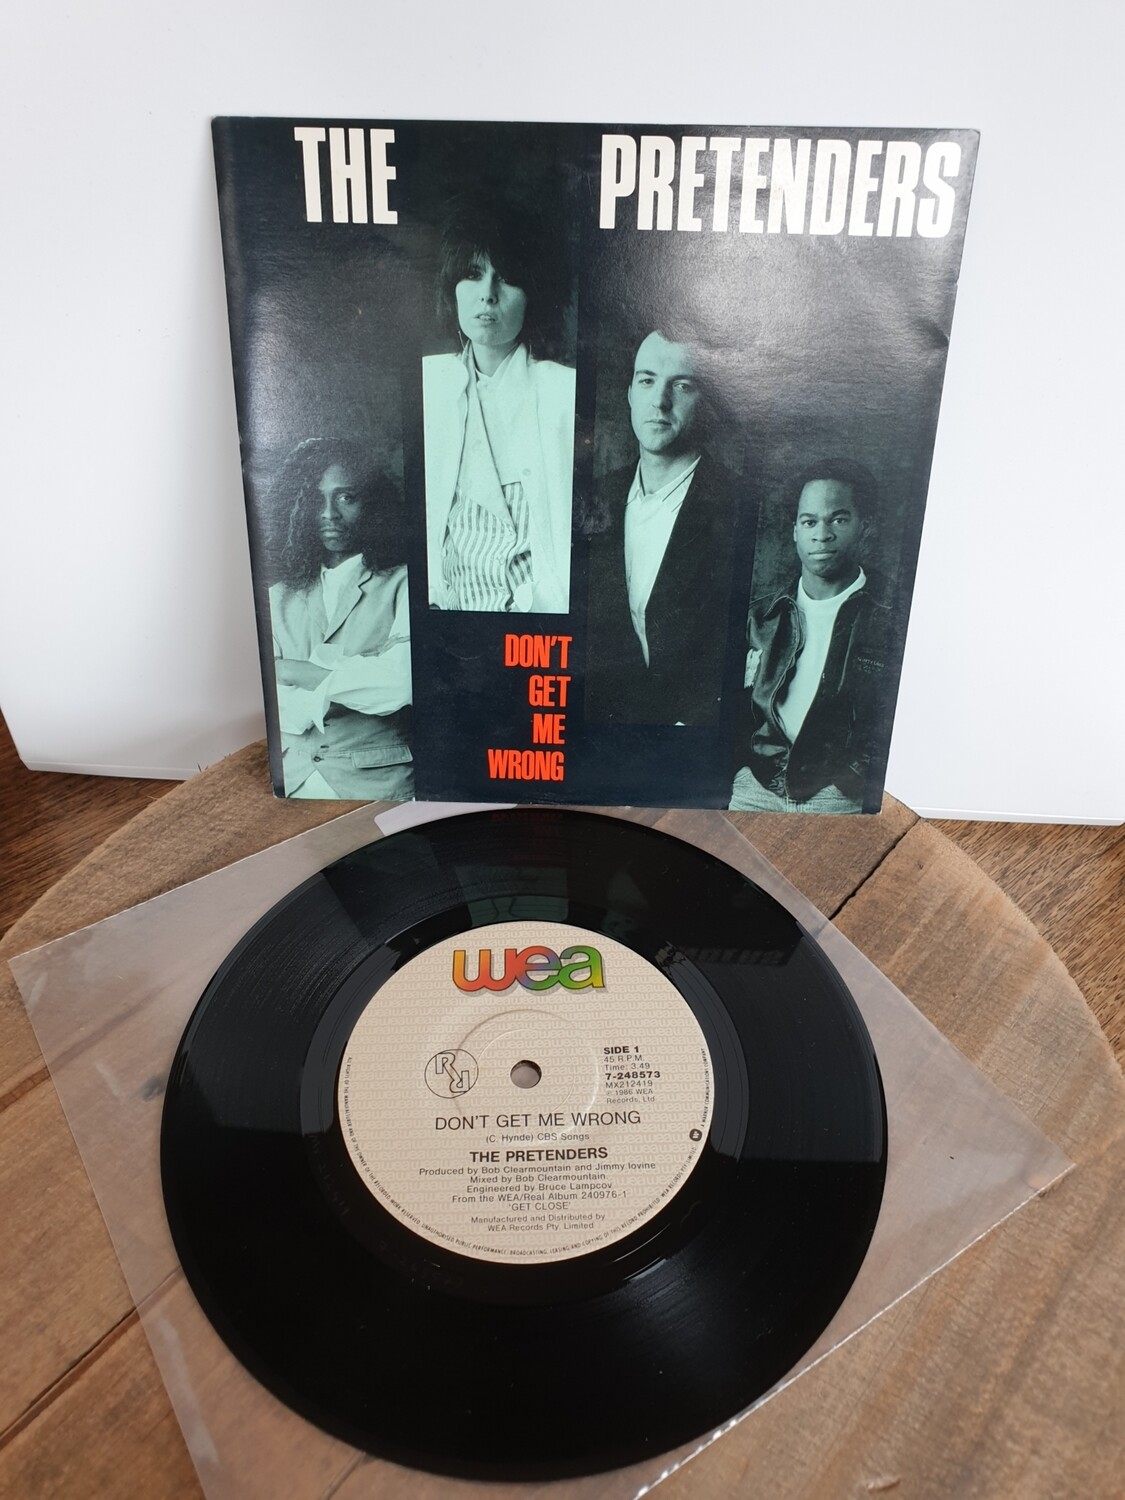 THE PRETENDERS DON'T GET ME WRONG 7"SINGLE